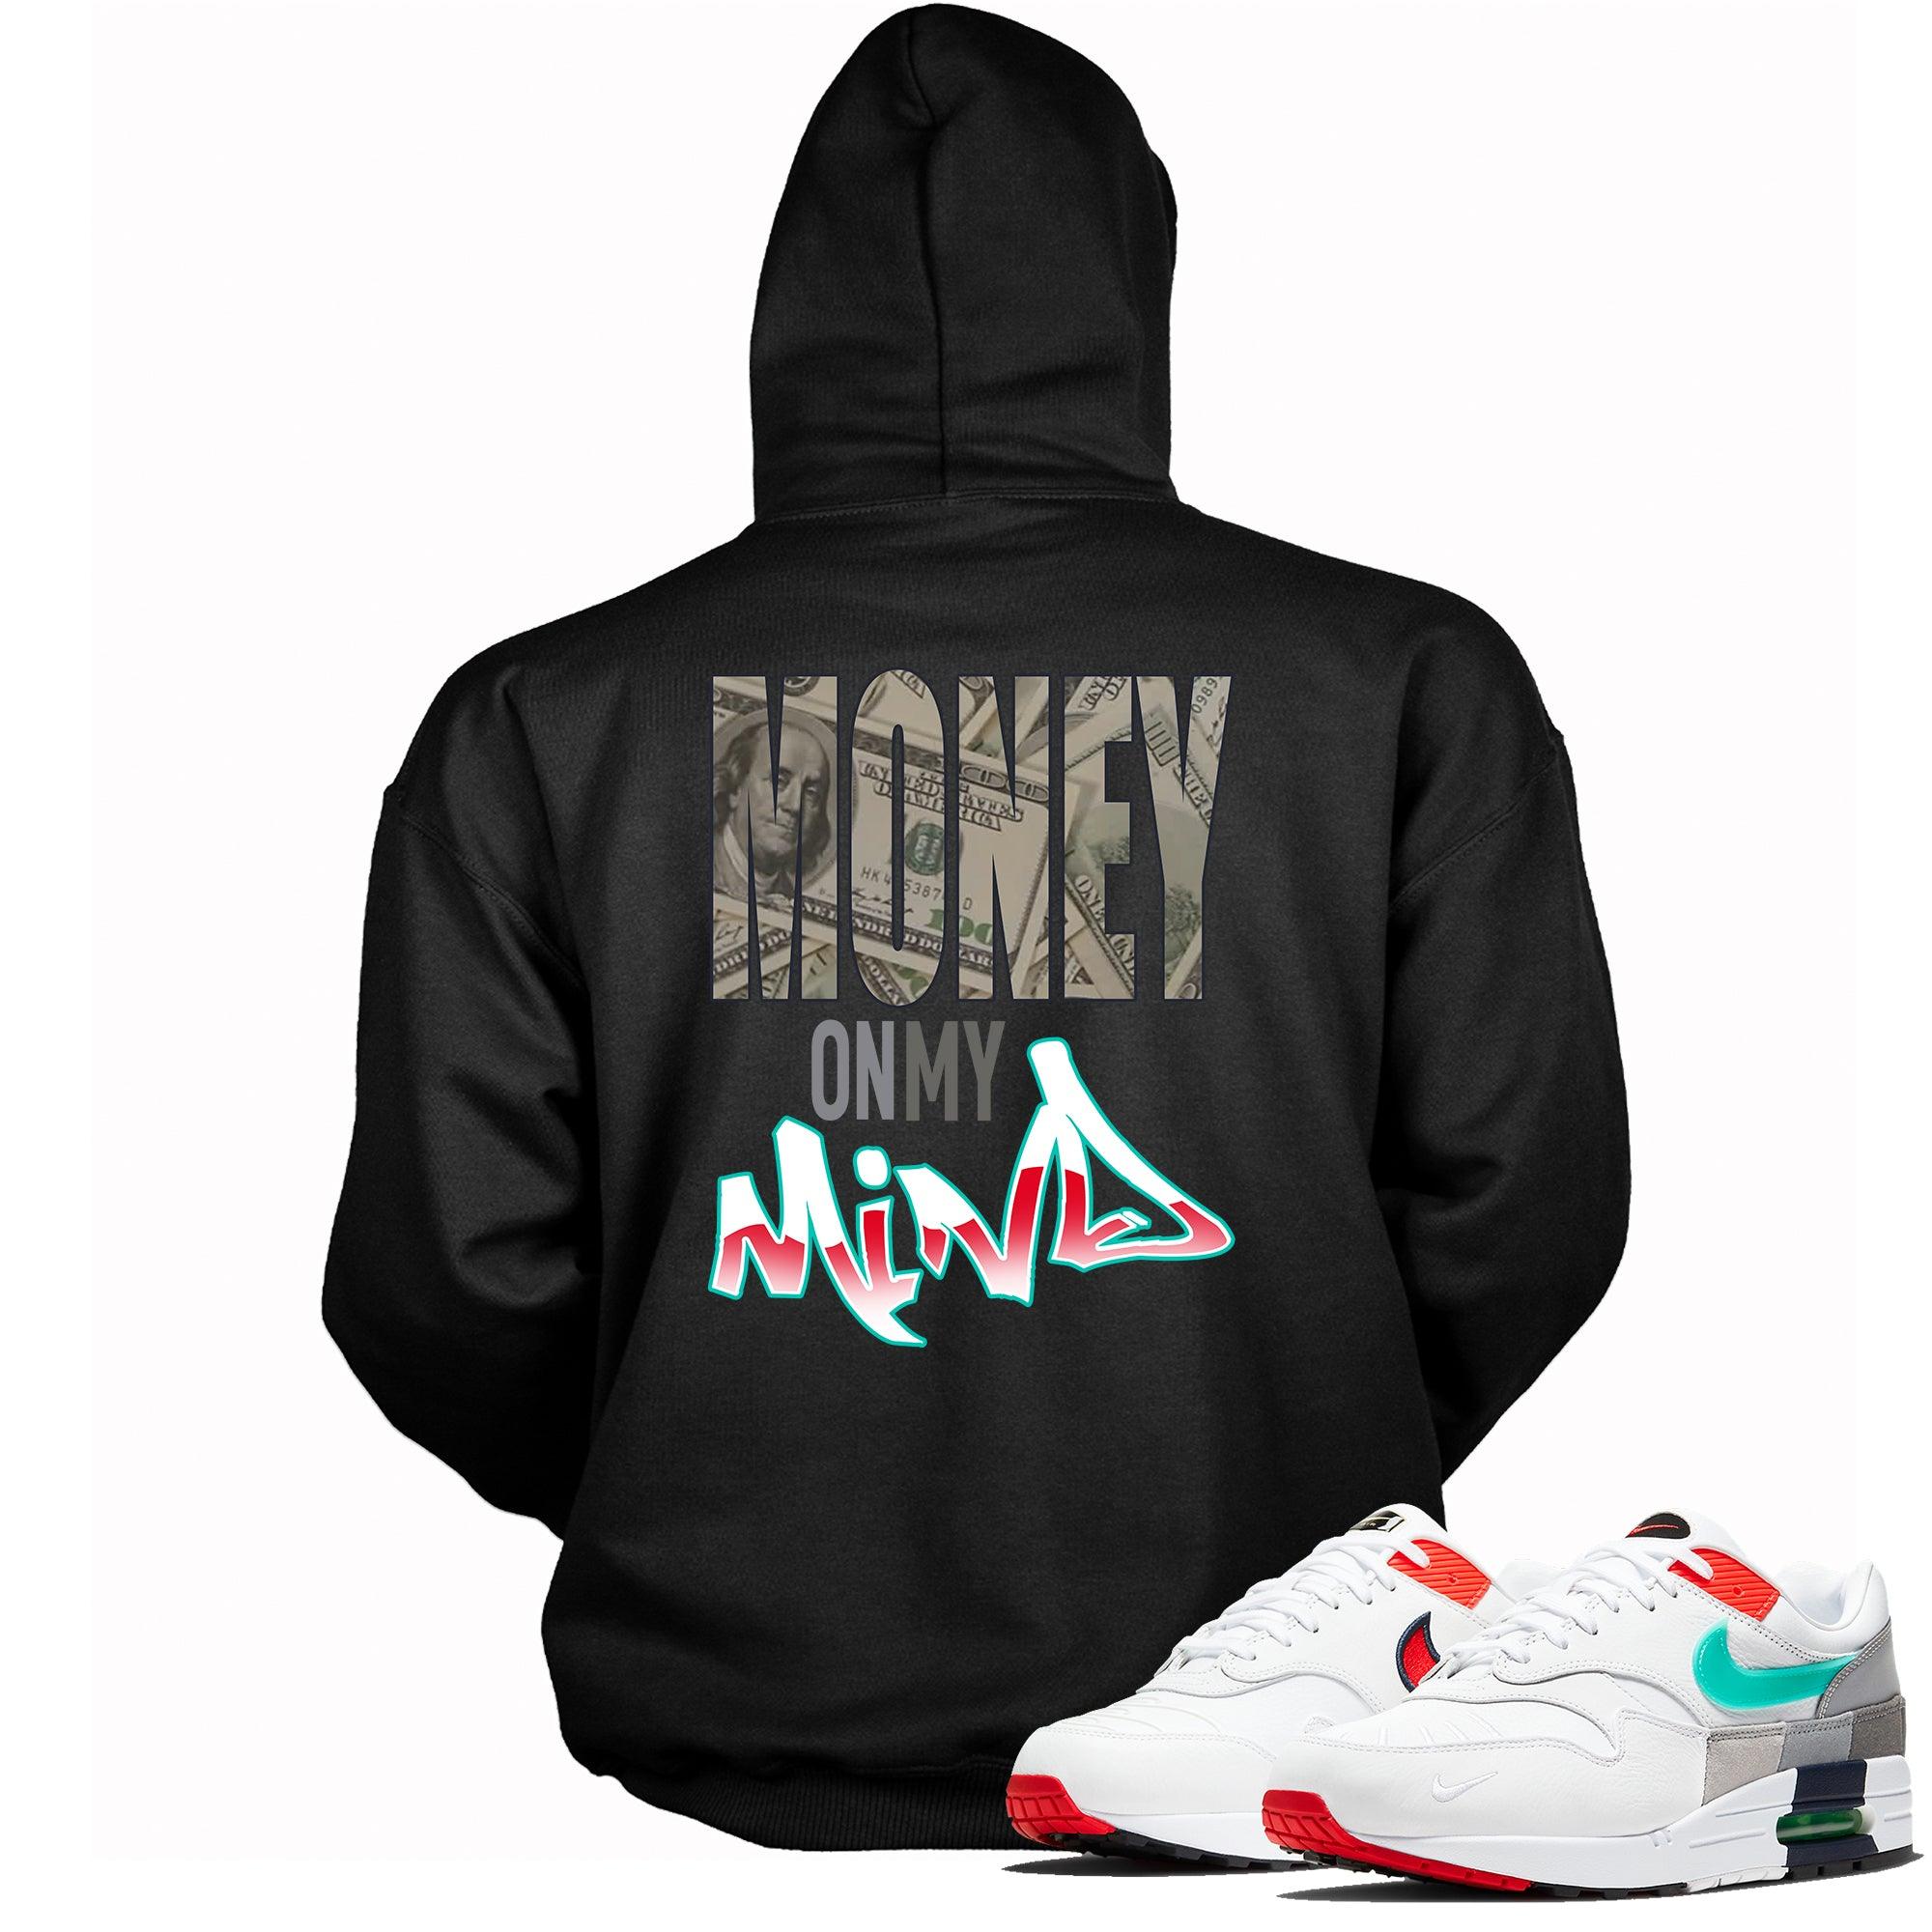 Money On My Mind Hoodie Nike Air Max 1 Evolution Of Icons Sneakers photo